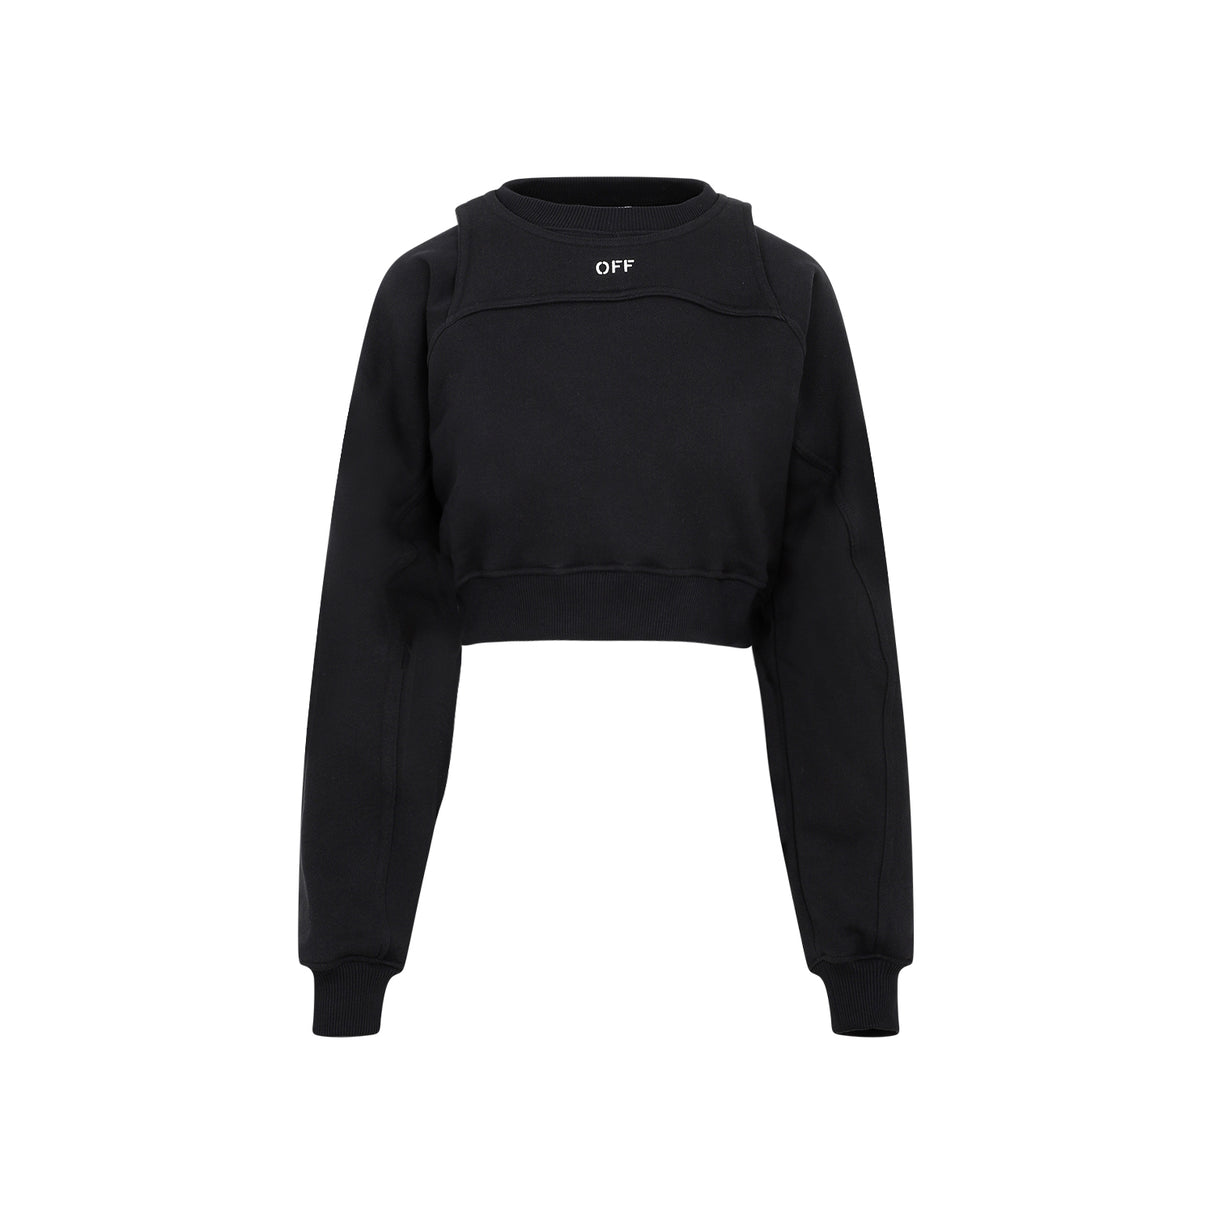 OFF-WHITE Black Fleece Cropped Sweatshirt for Women - FW23 Collection